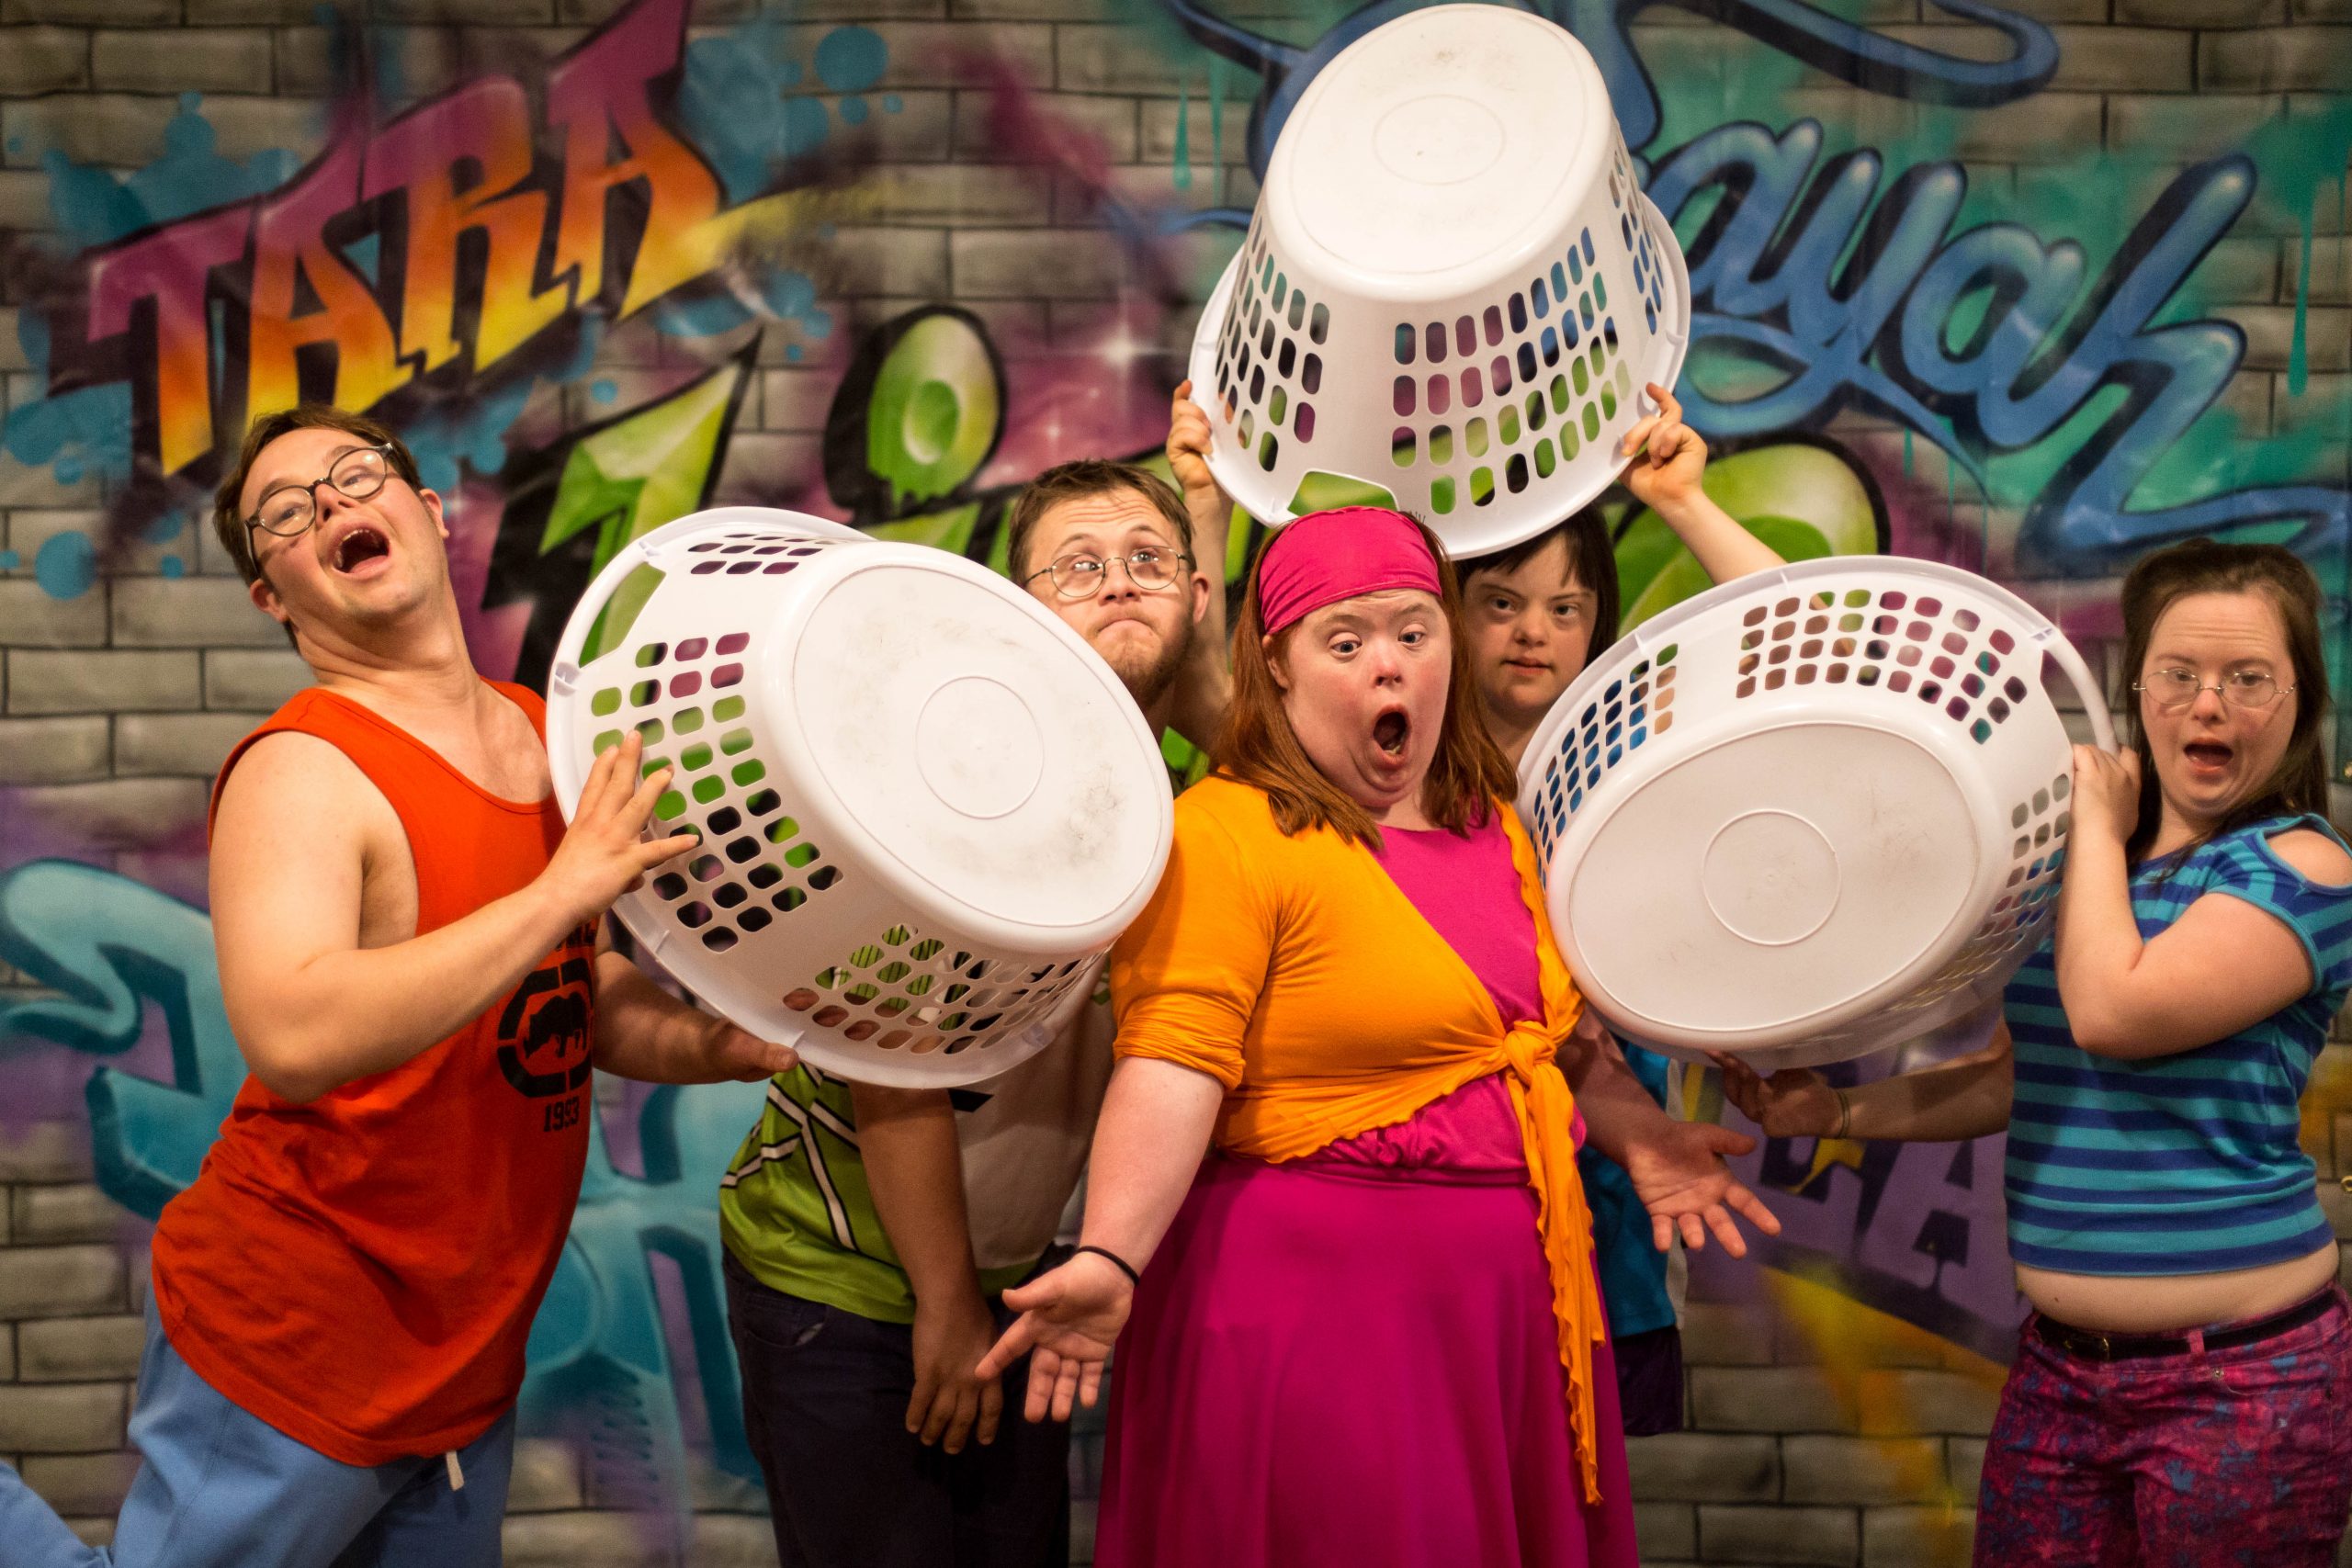 Five actors are on stage, wearing brightly coloured clothes and against a backdrop of a wall covered in graffiti.Three hold white laundry baskets and three appear to be singing.